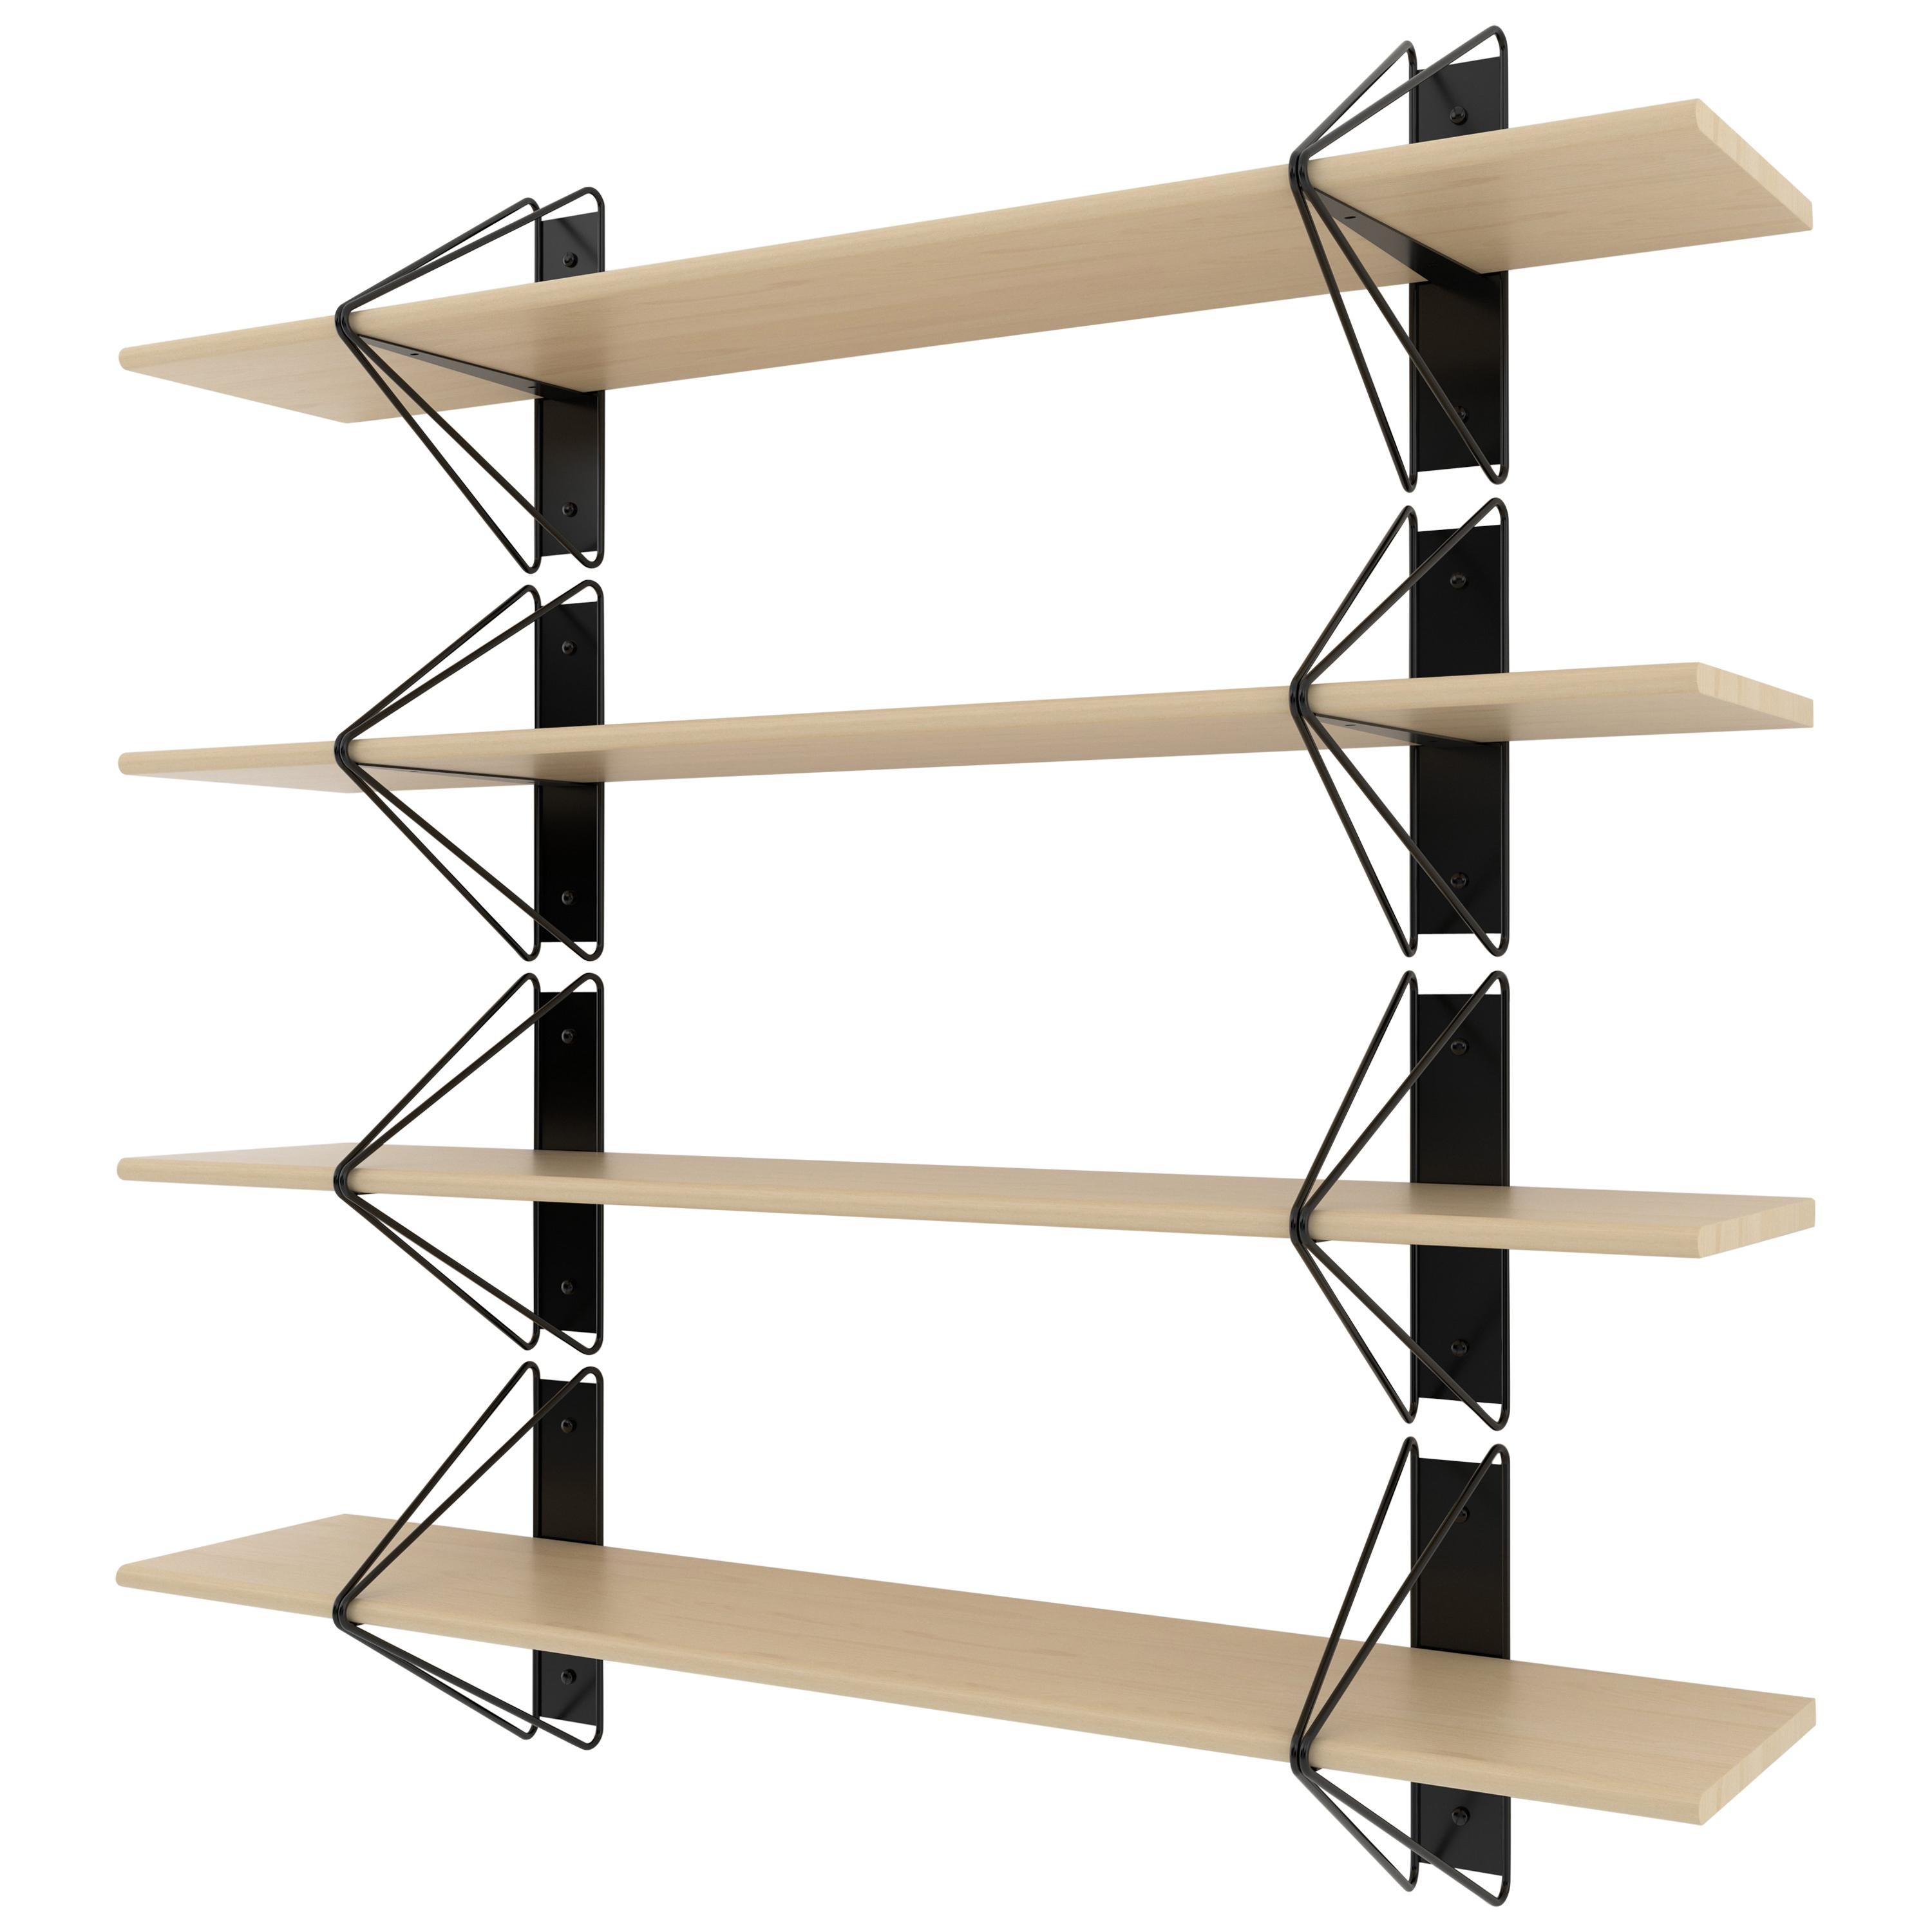 American Set of 5 Strut Shelves from Souda, Black and Maple, Made to Order For Sale